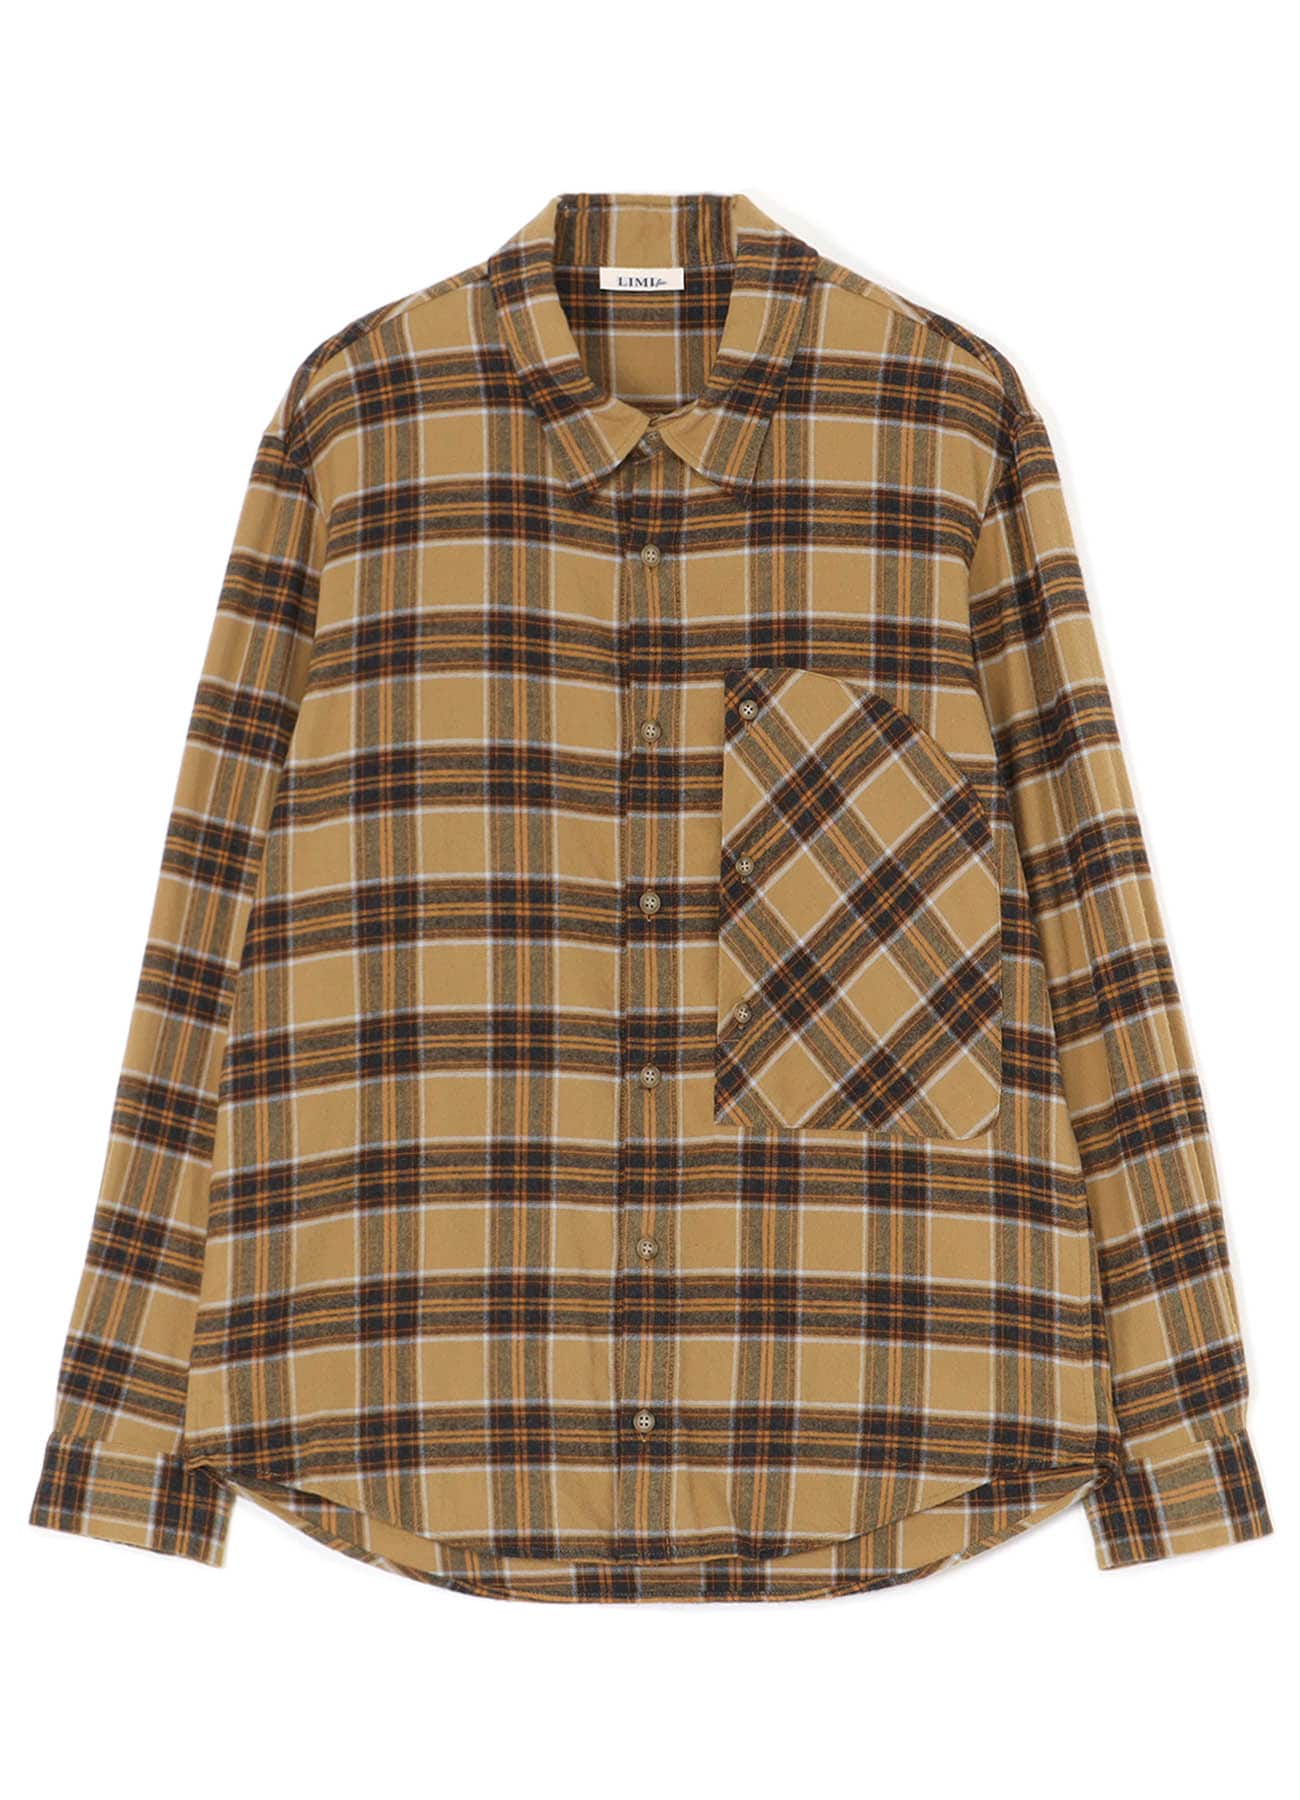 PLAID FLANNEL SHIRT WITH BIG CHEST POCKET(S Yellow): Vintage 1.1